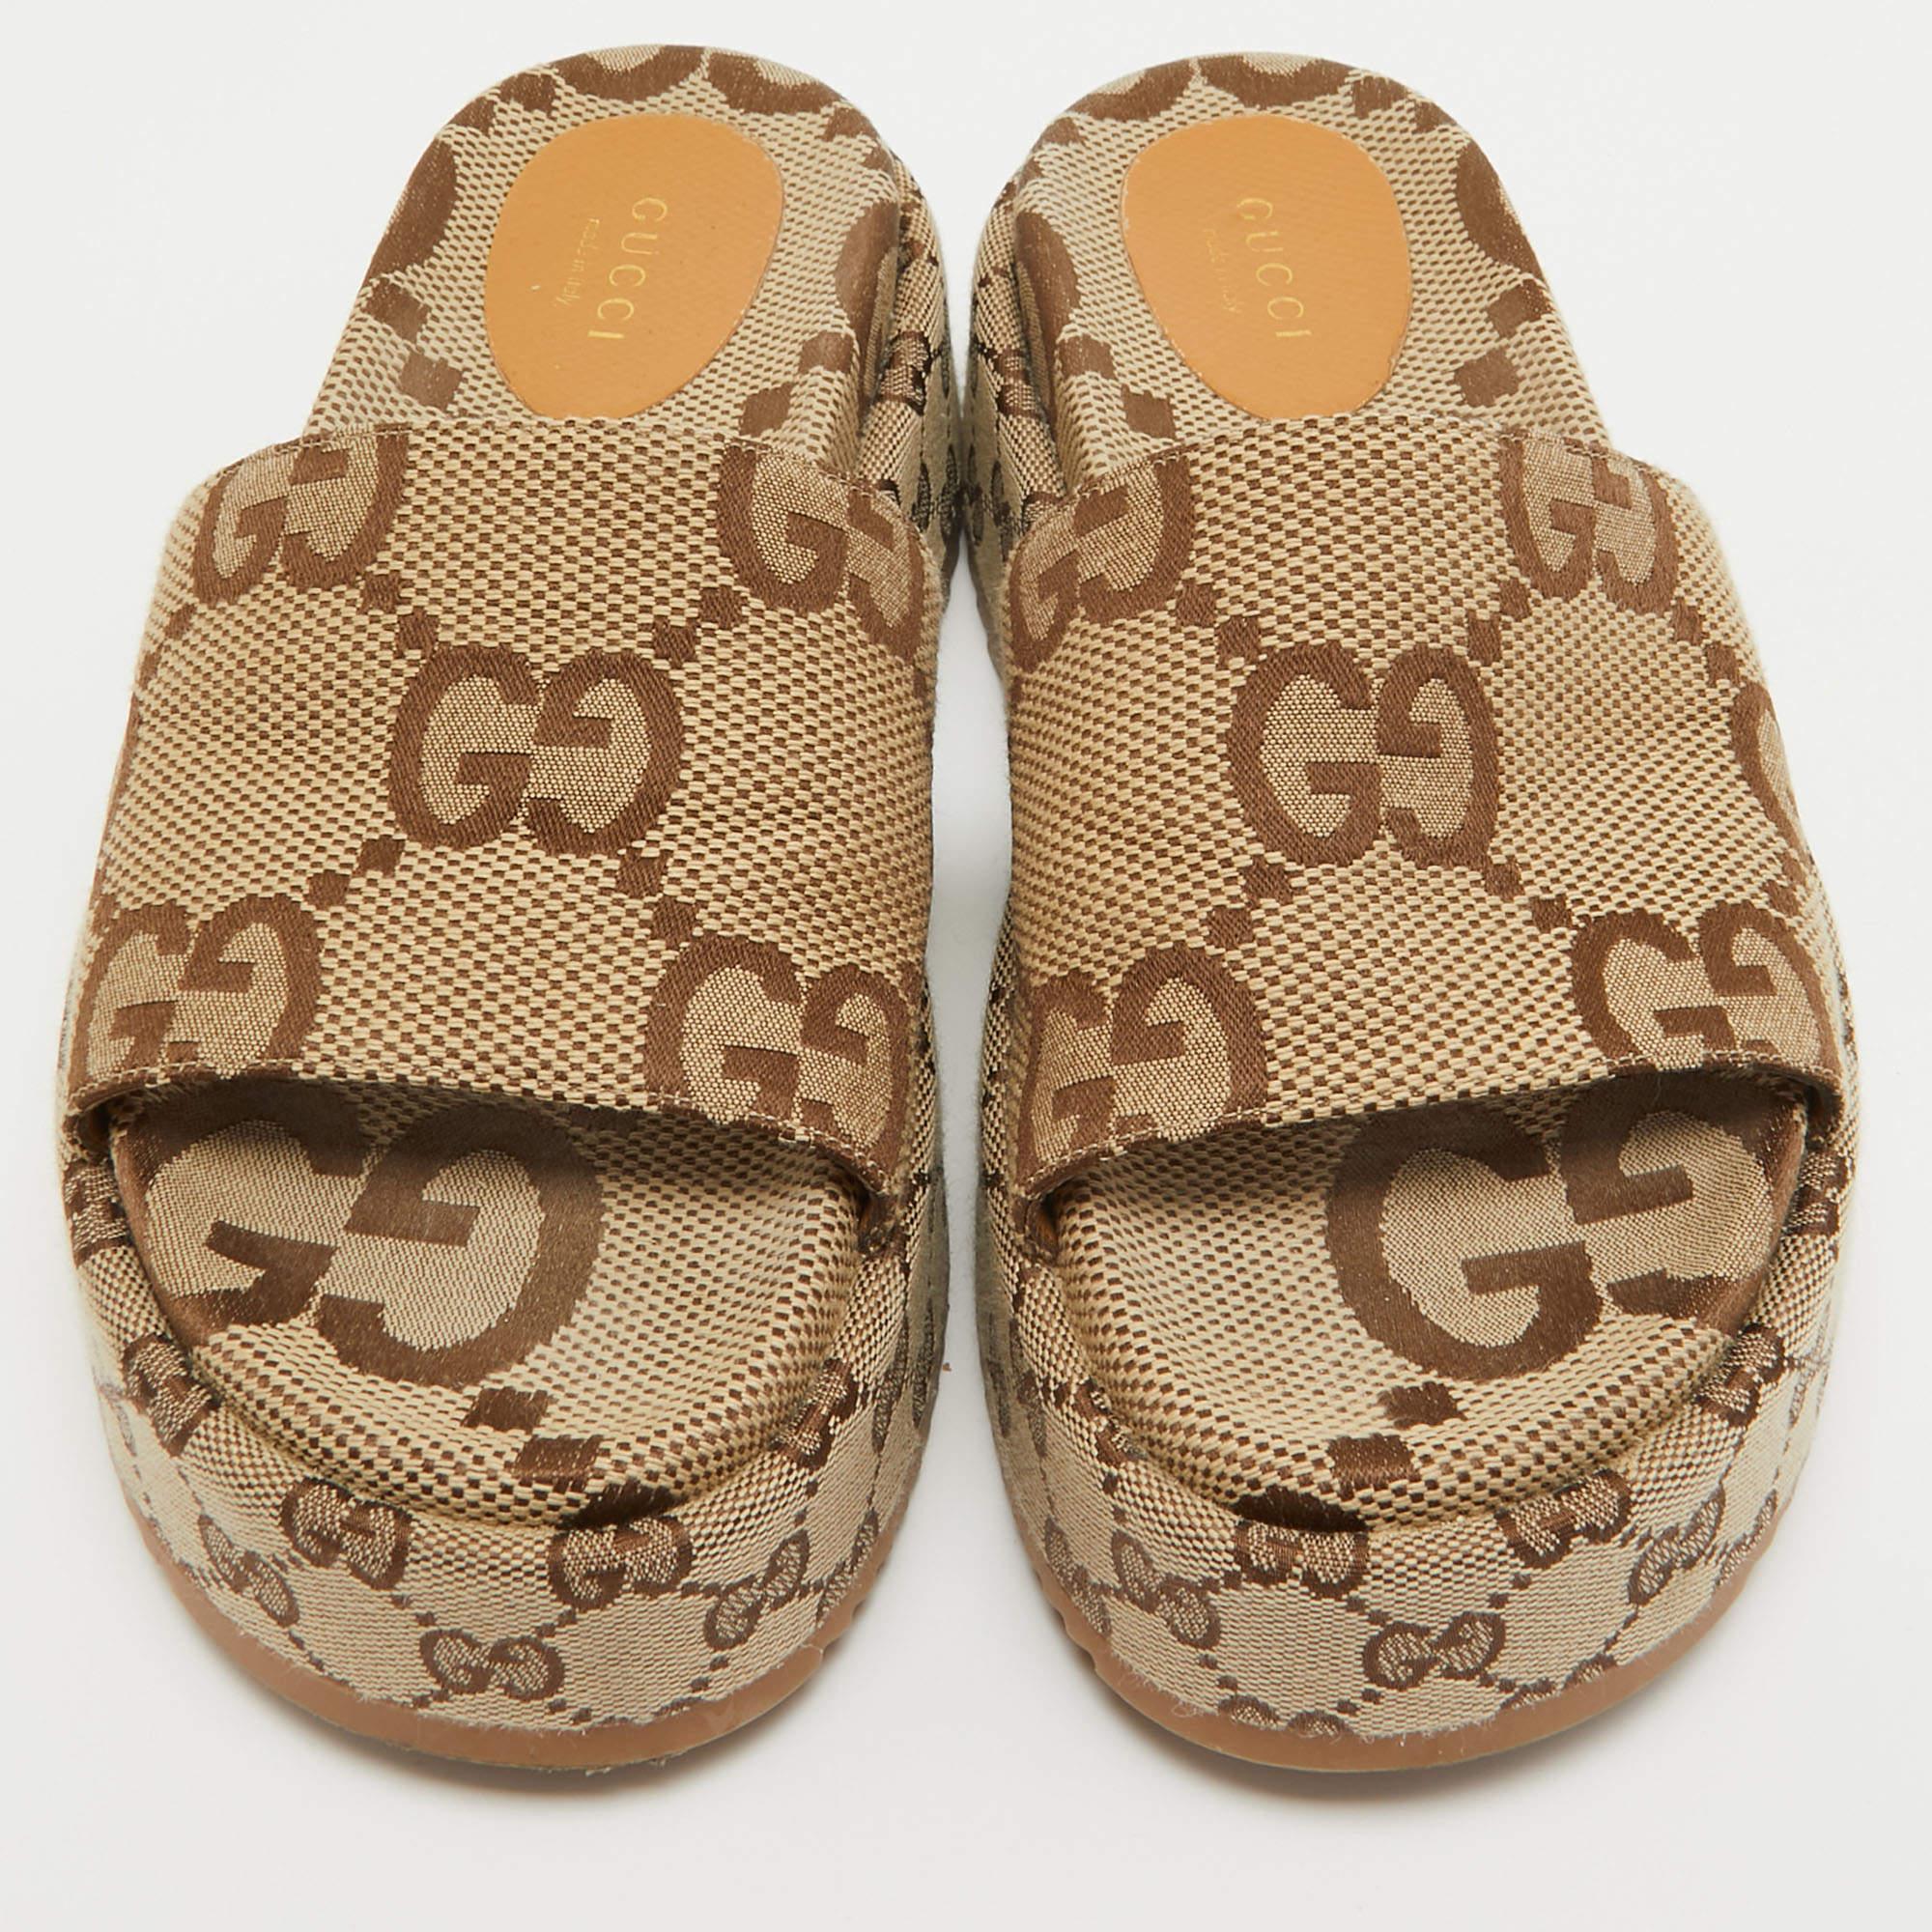 Create effortless styles with these Gucci platform slides. Made of quality materials, they are designed to elevate your OOTD and keep you in comfort all day long.

